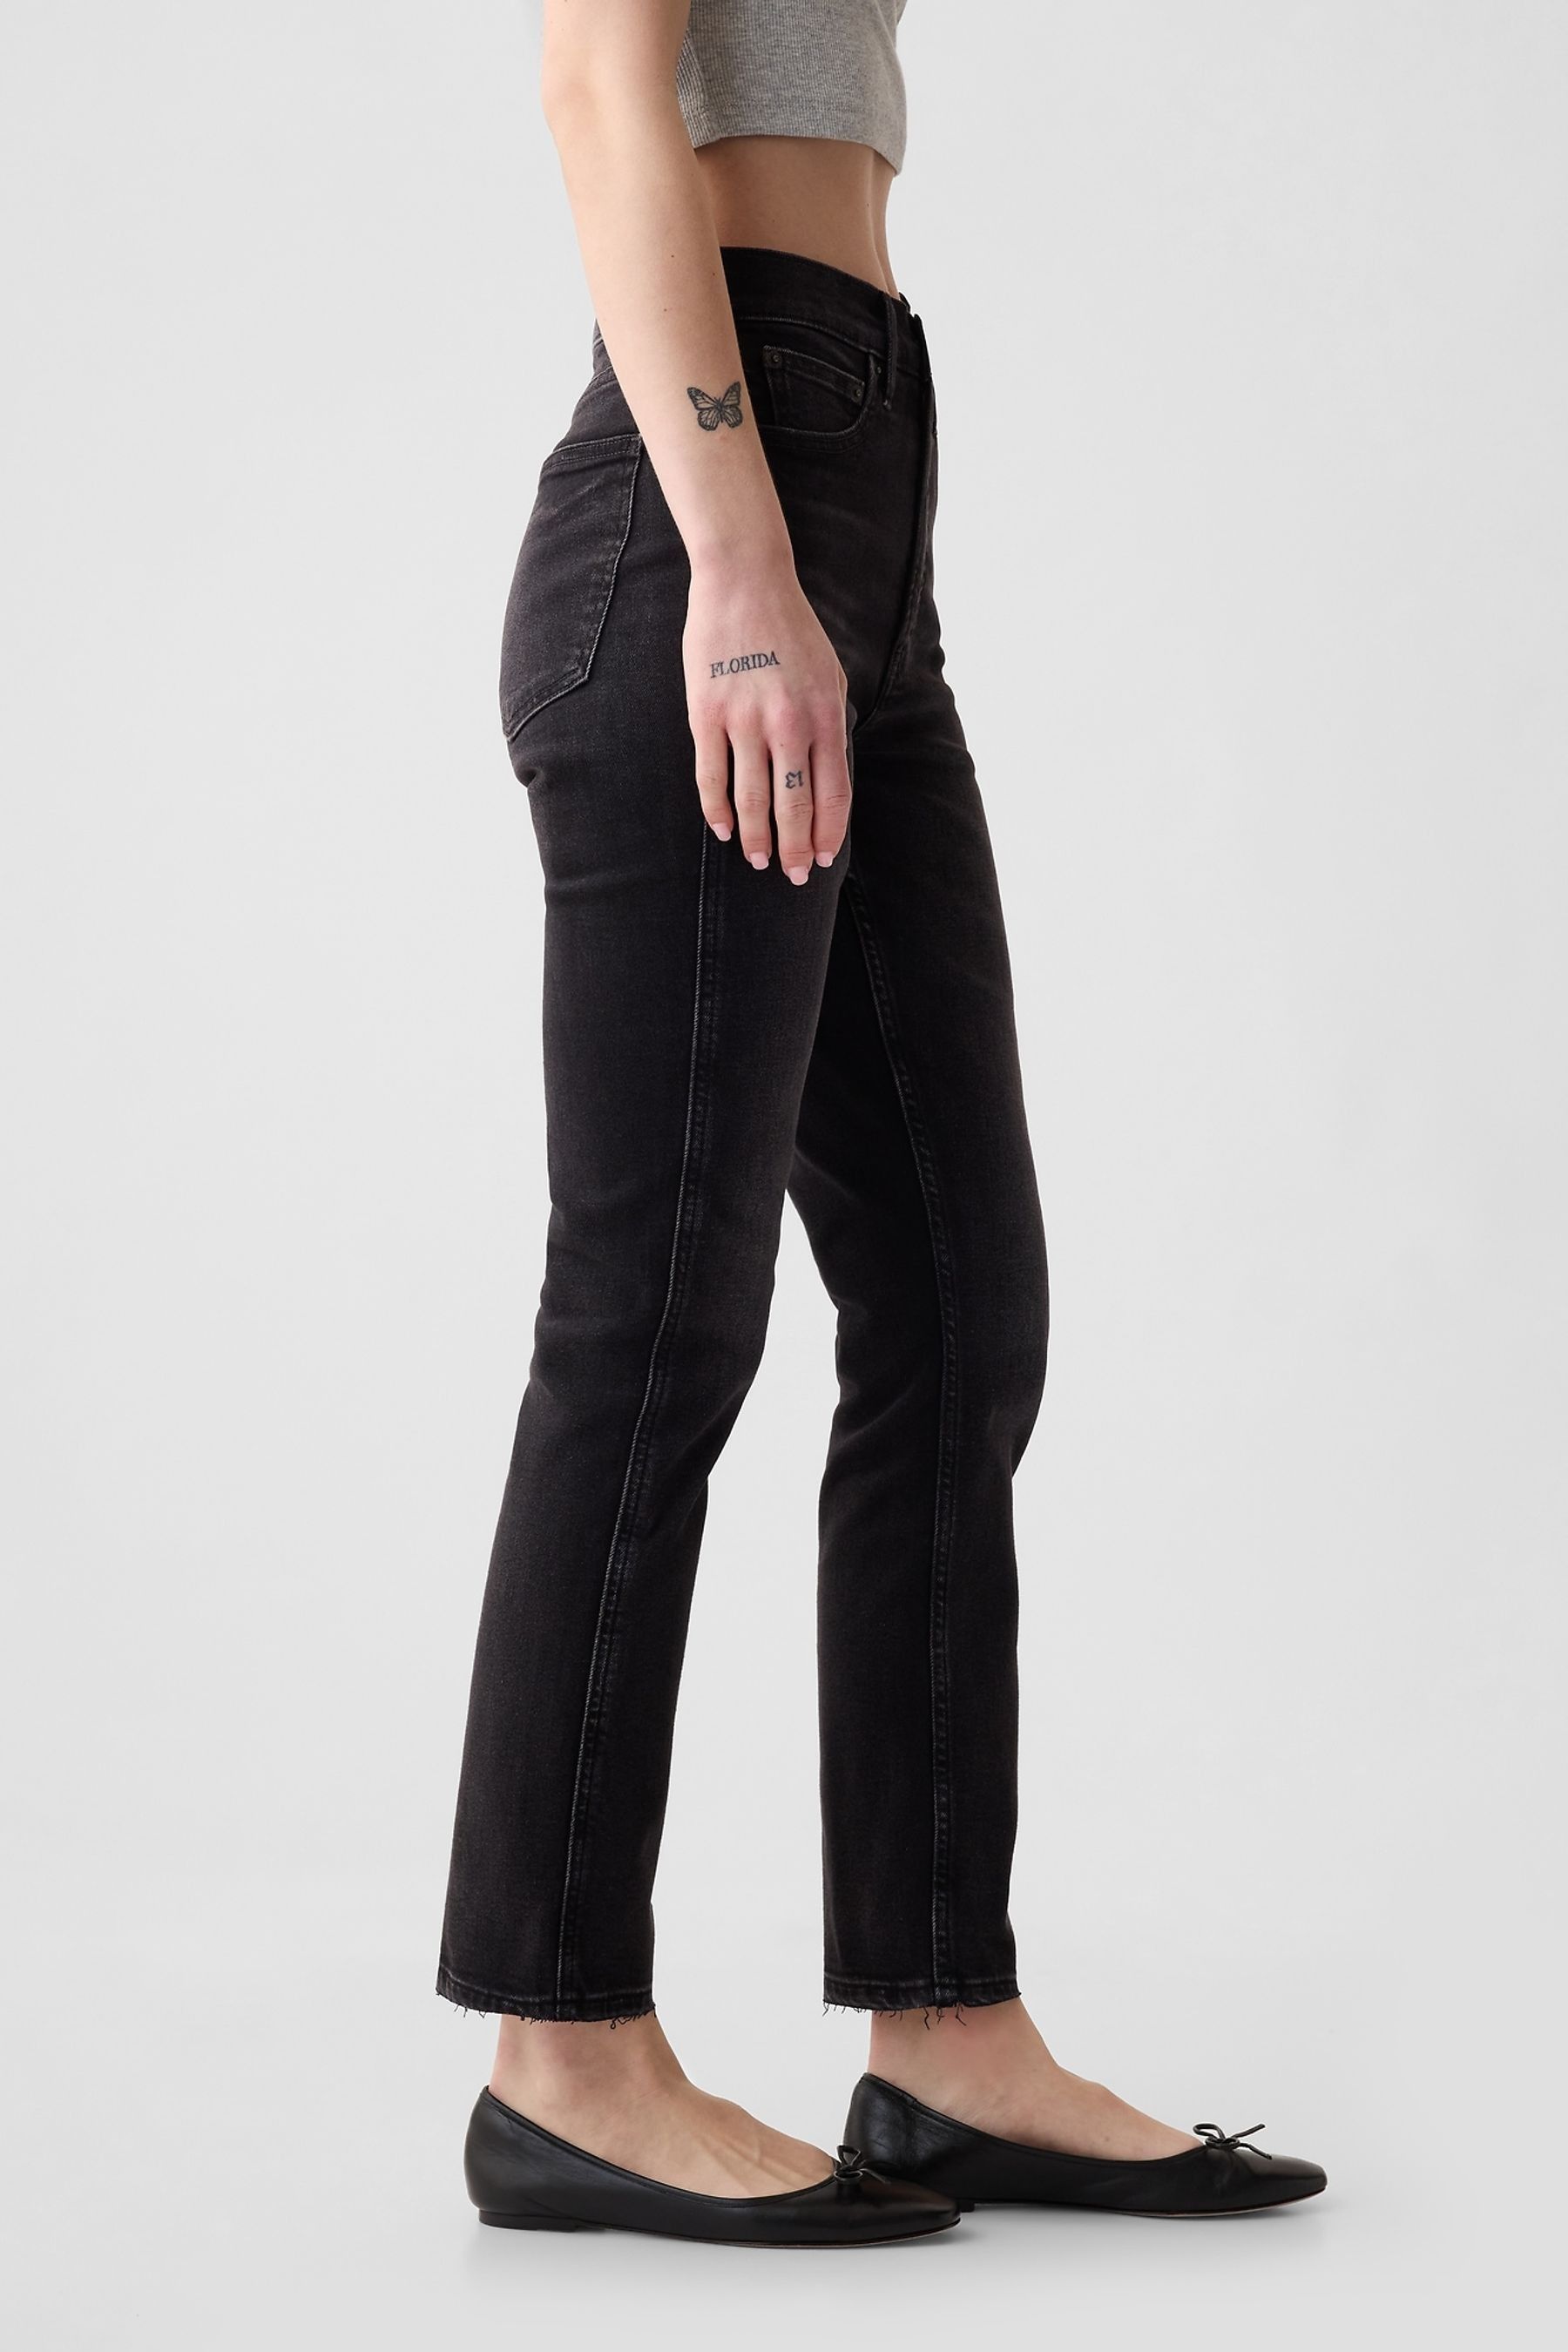 Buy Gap High Waisted Vintage Slim Jeans from the Gap online shop